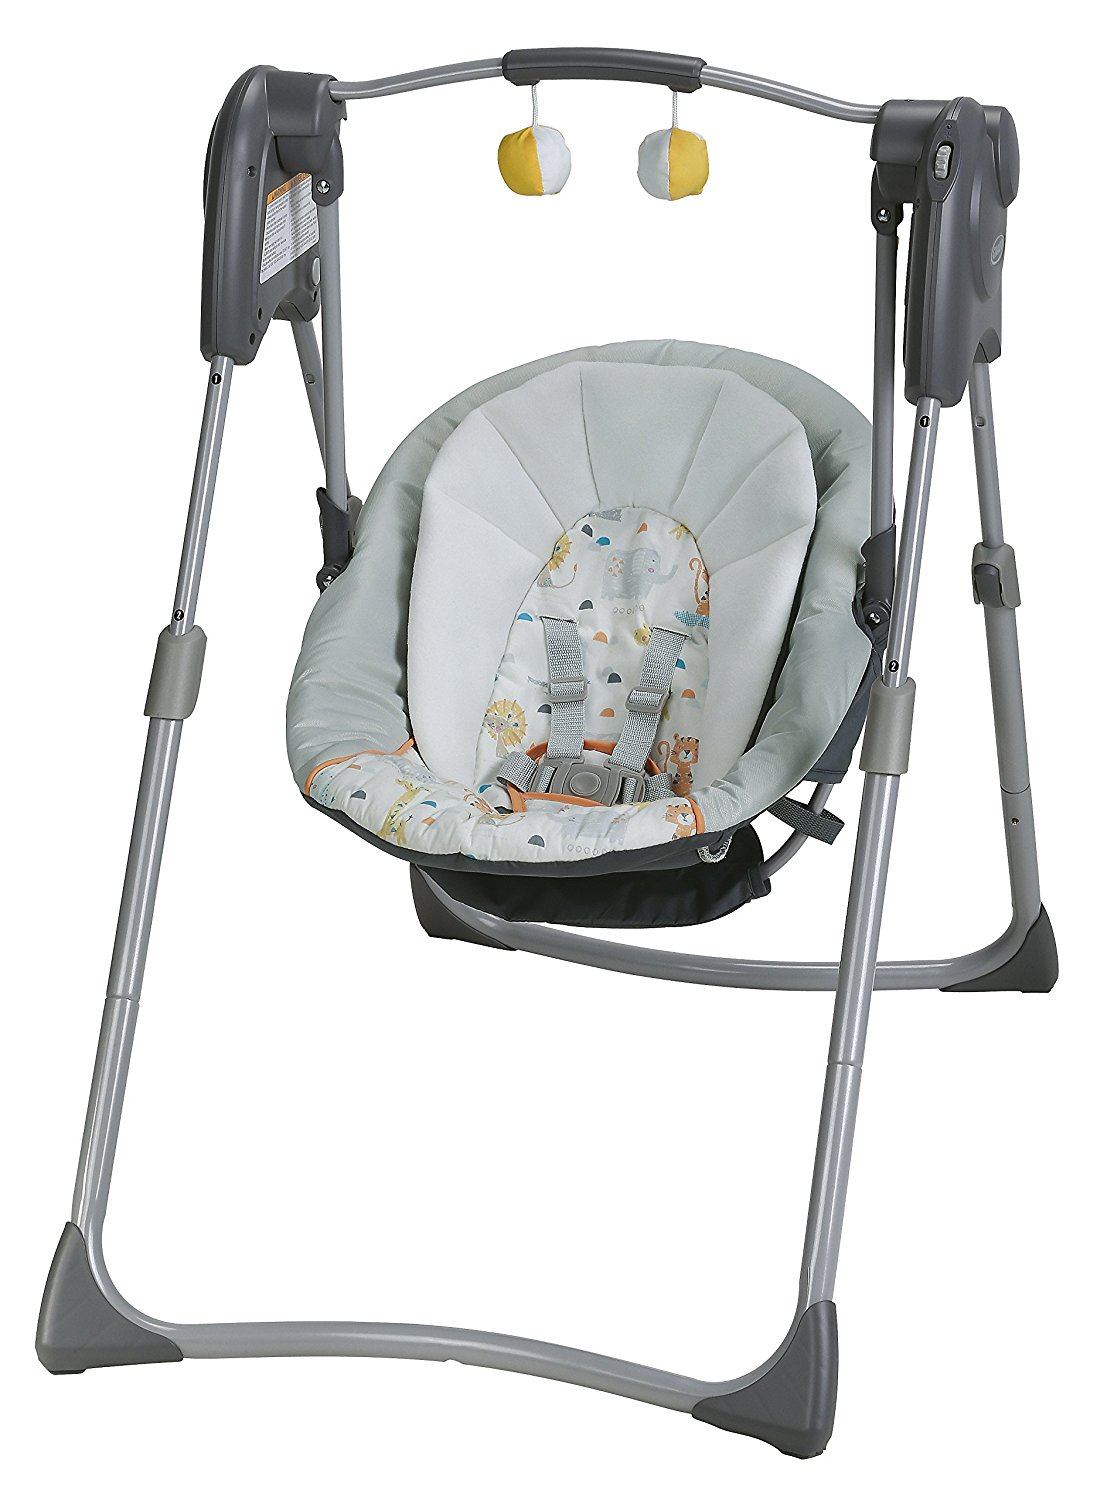 Prime Day Deal – Graco Slim Spaces Compact Baby Swing in Linus – Just $43.99!